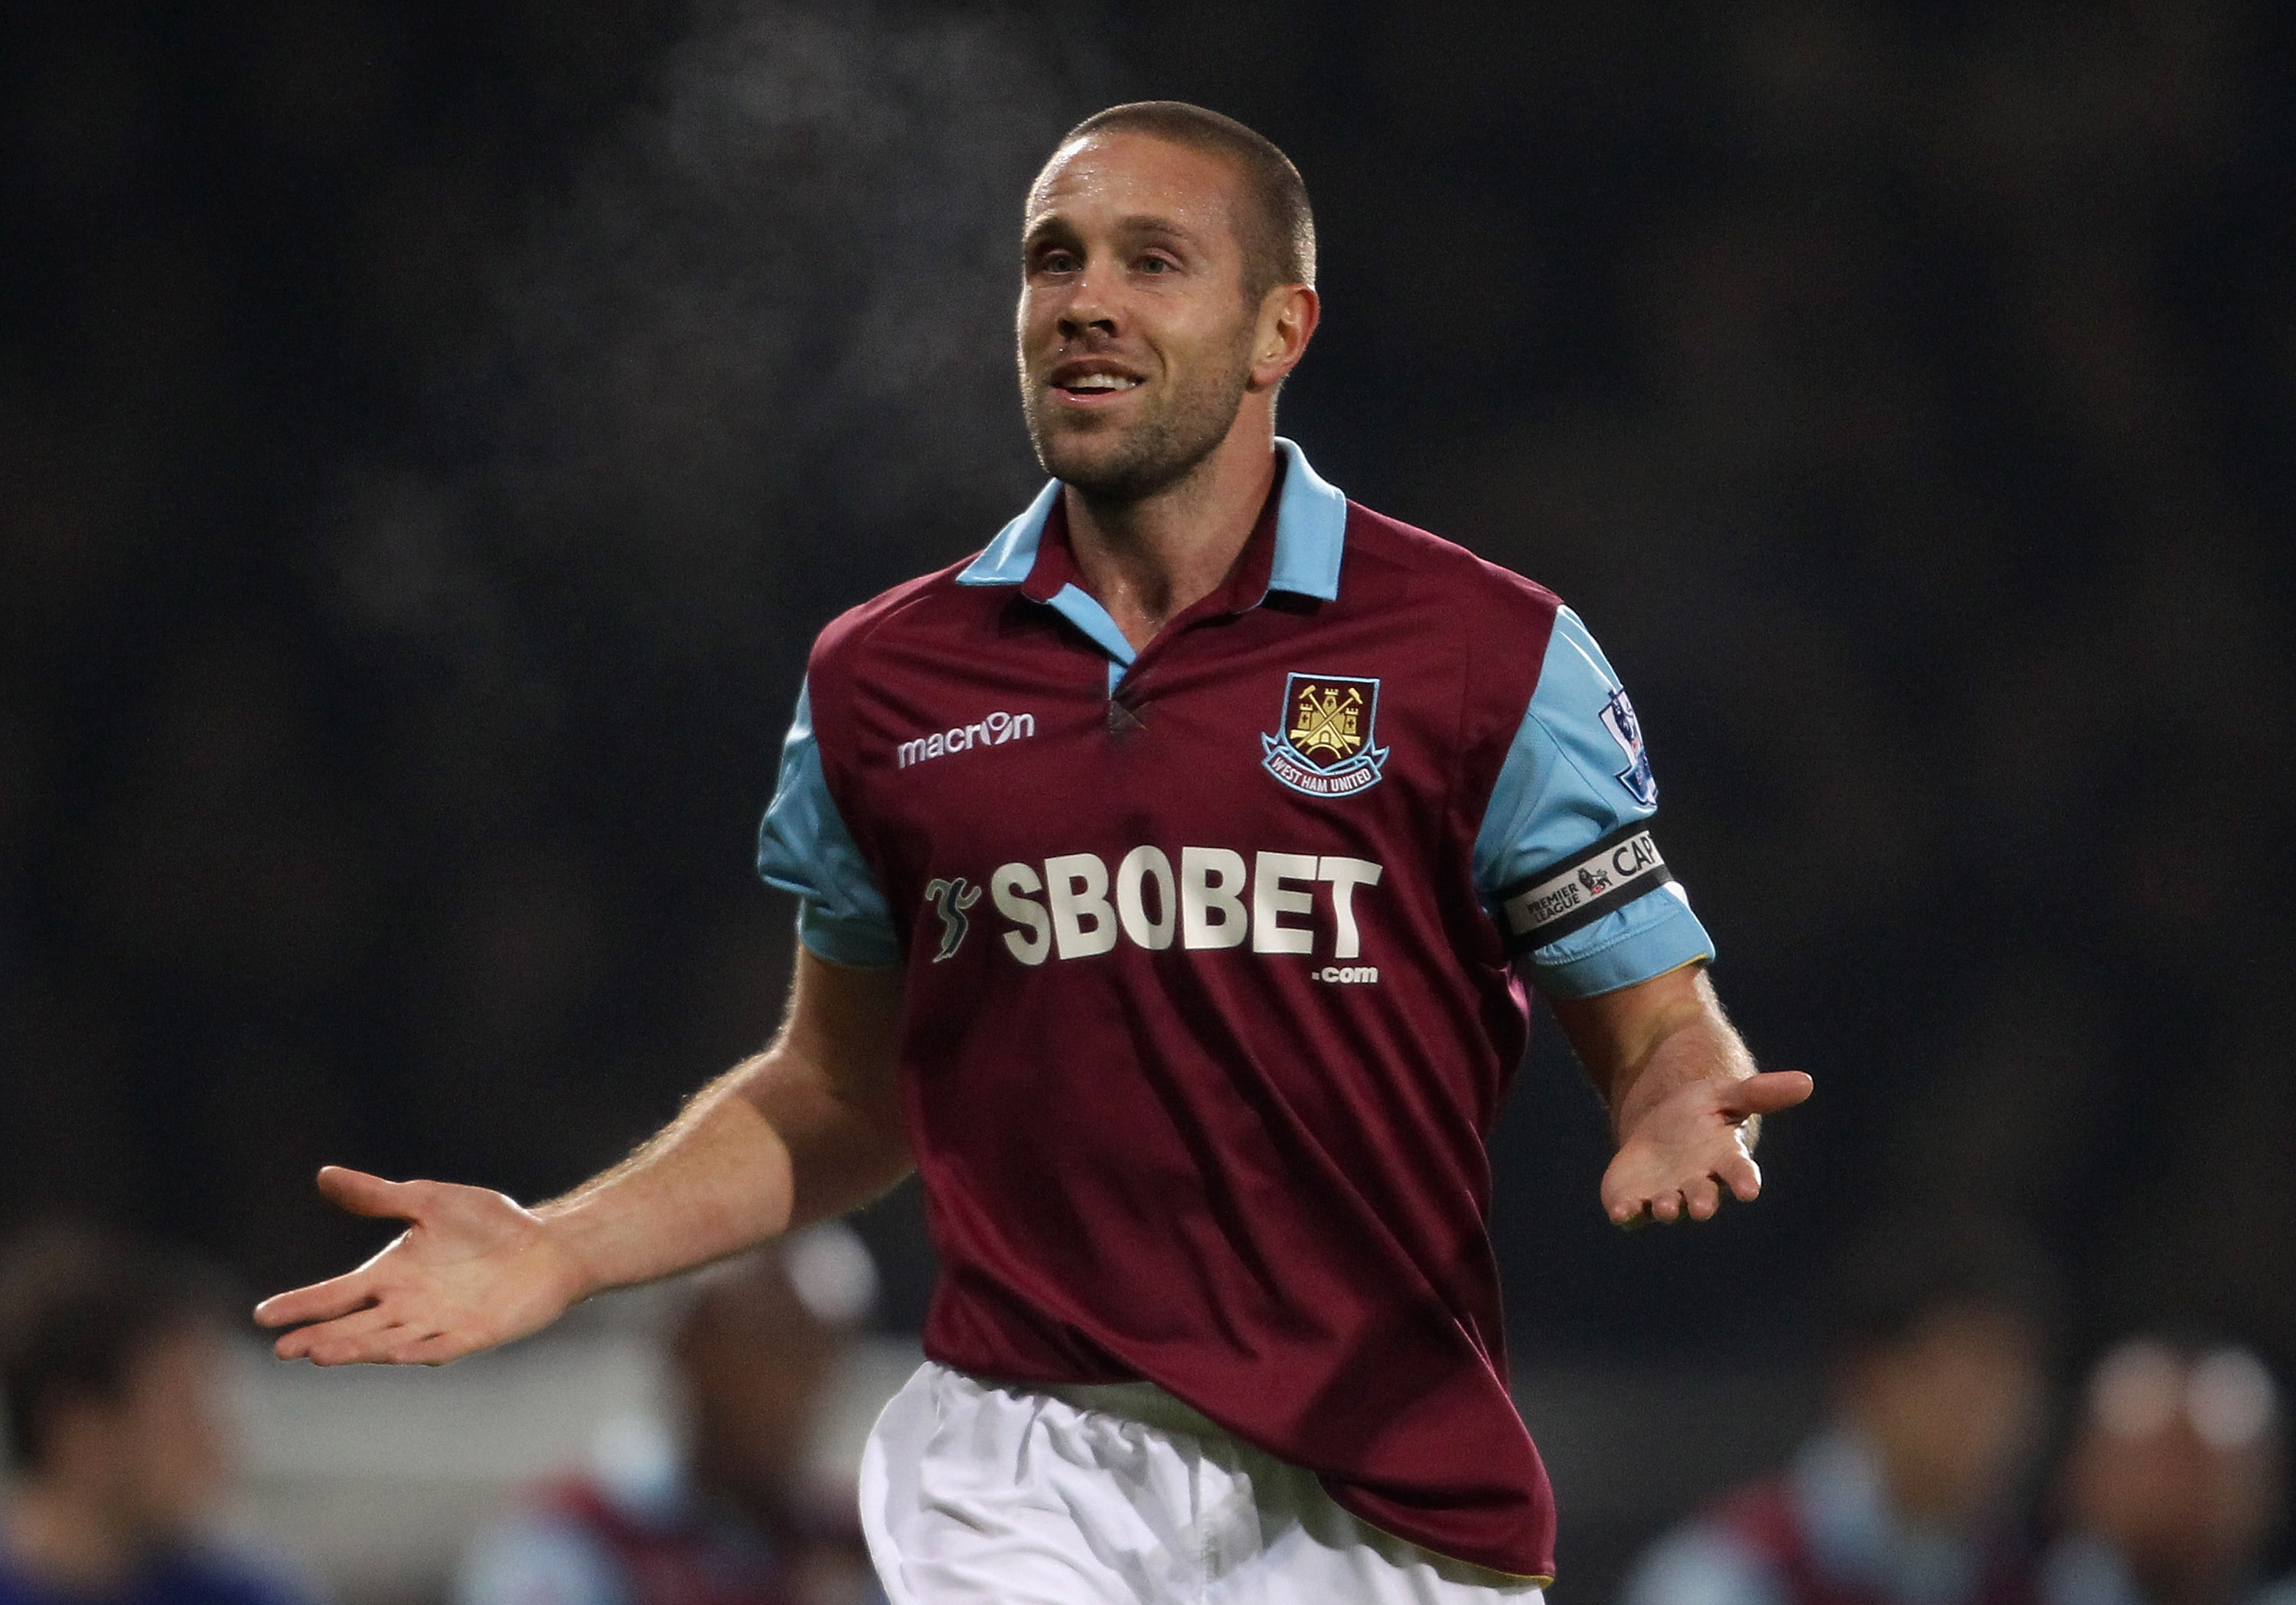 LONDON, ENGLAND - DECEMBER 28:  Matthew Upson of West Ham United celebrates the own goal by Tony Hibbert of Everton during the Barclays Premier League match between West Ham United and Everton at the Boleyn Ground on December 28, 2010 in London, England.